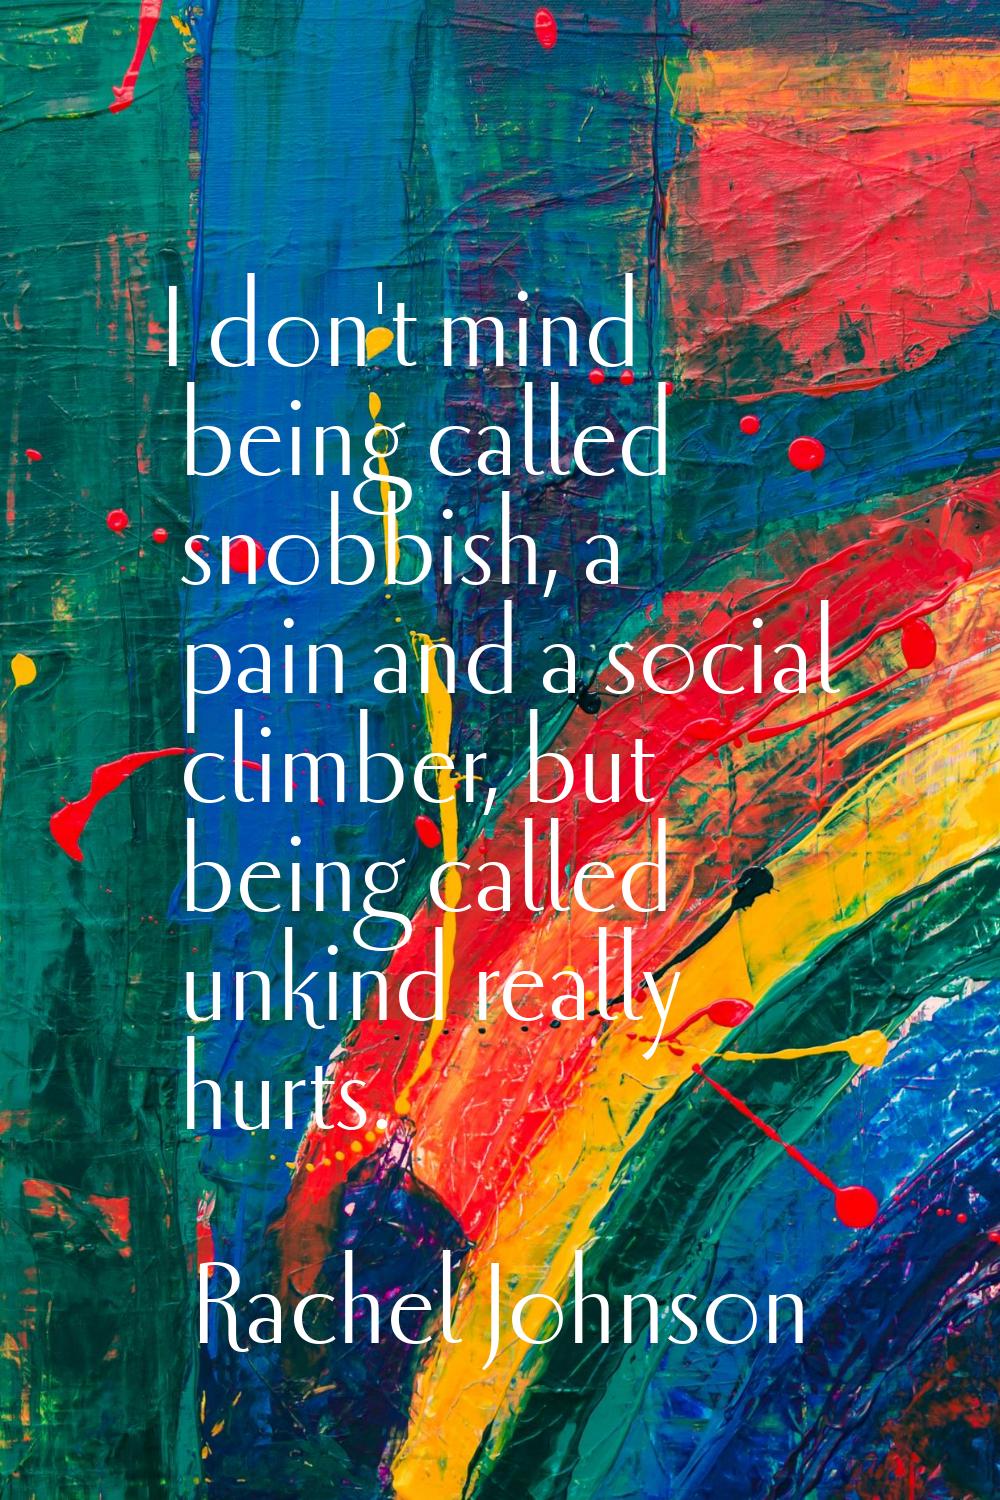 I don't mind being called snobbish, a pain and a social climber, but being called unkind really hur